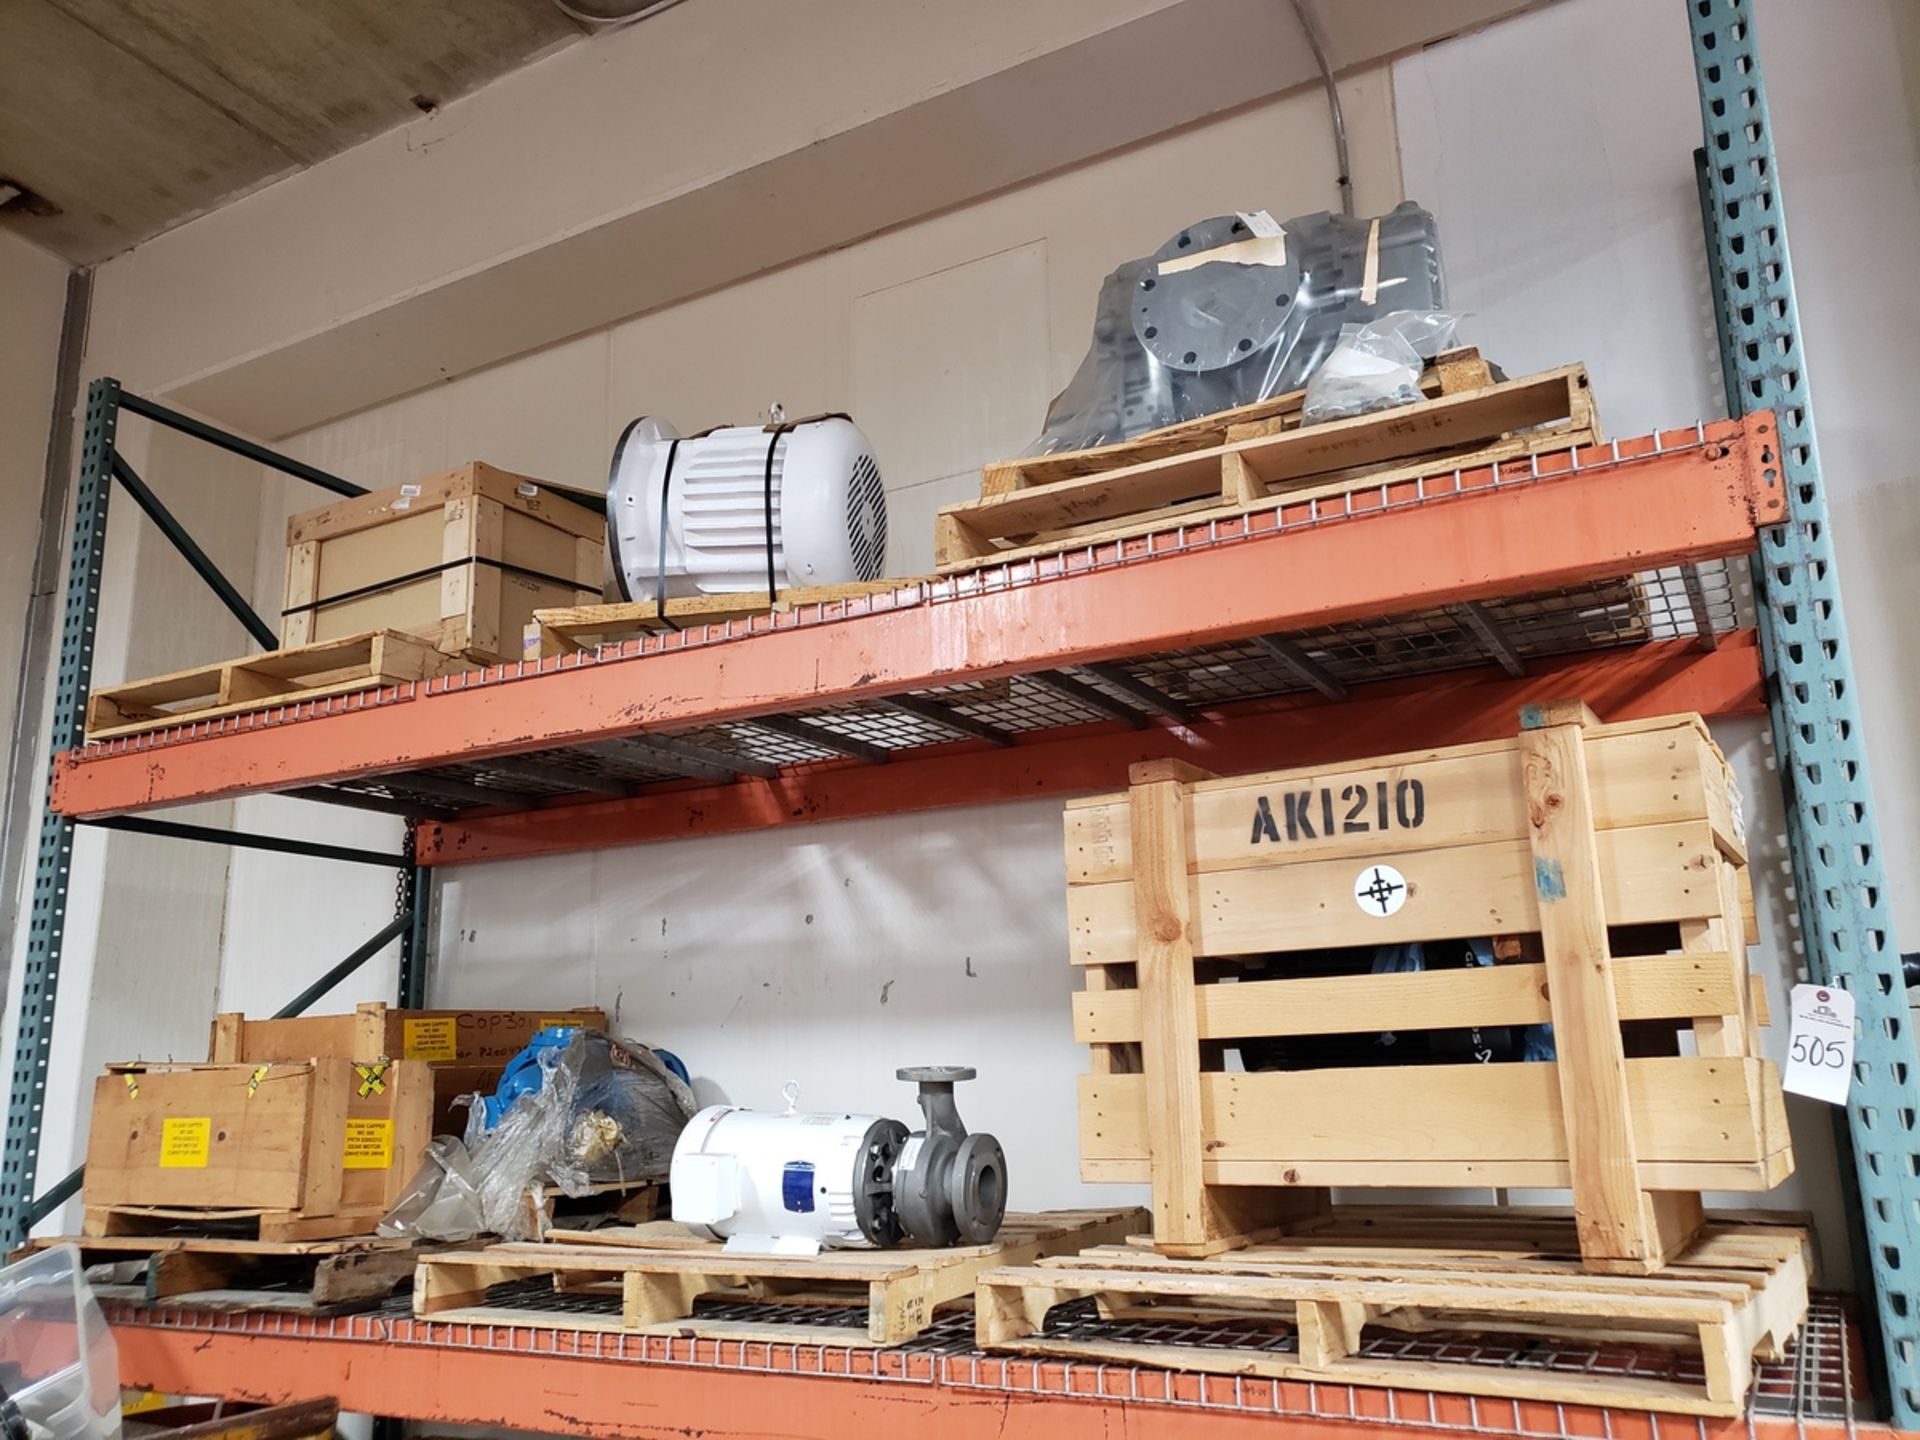 Contents Only of Pallet Rack, Spare Parts | Rig Fee $300